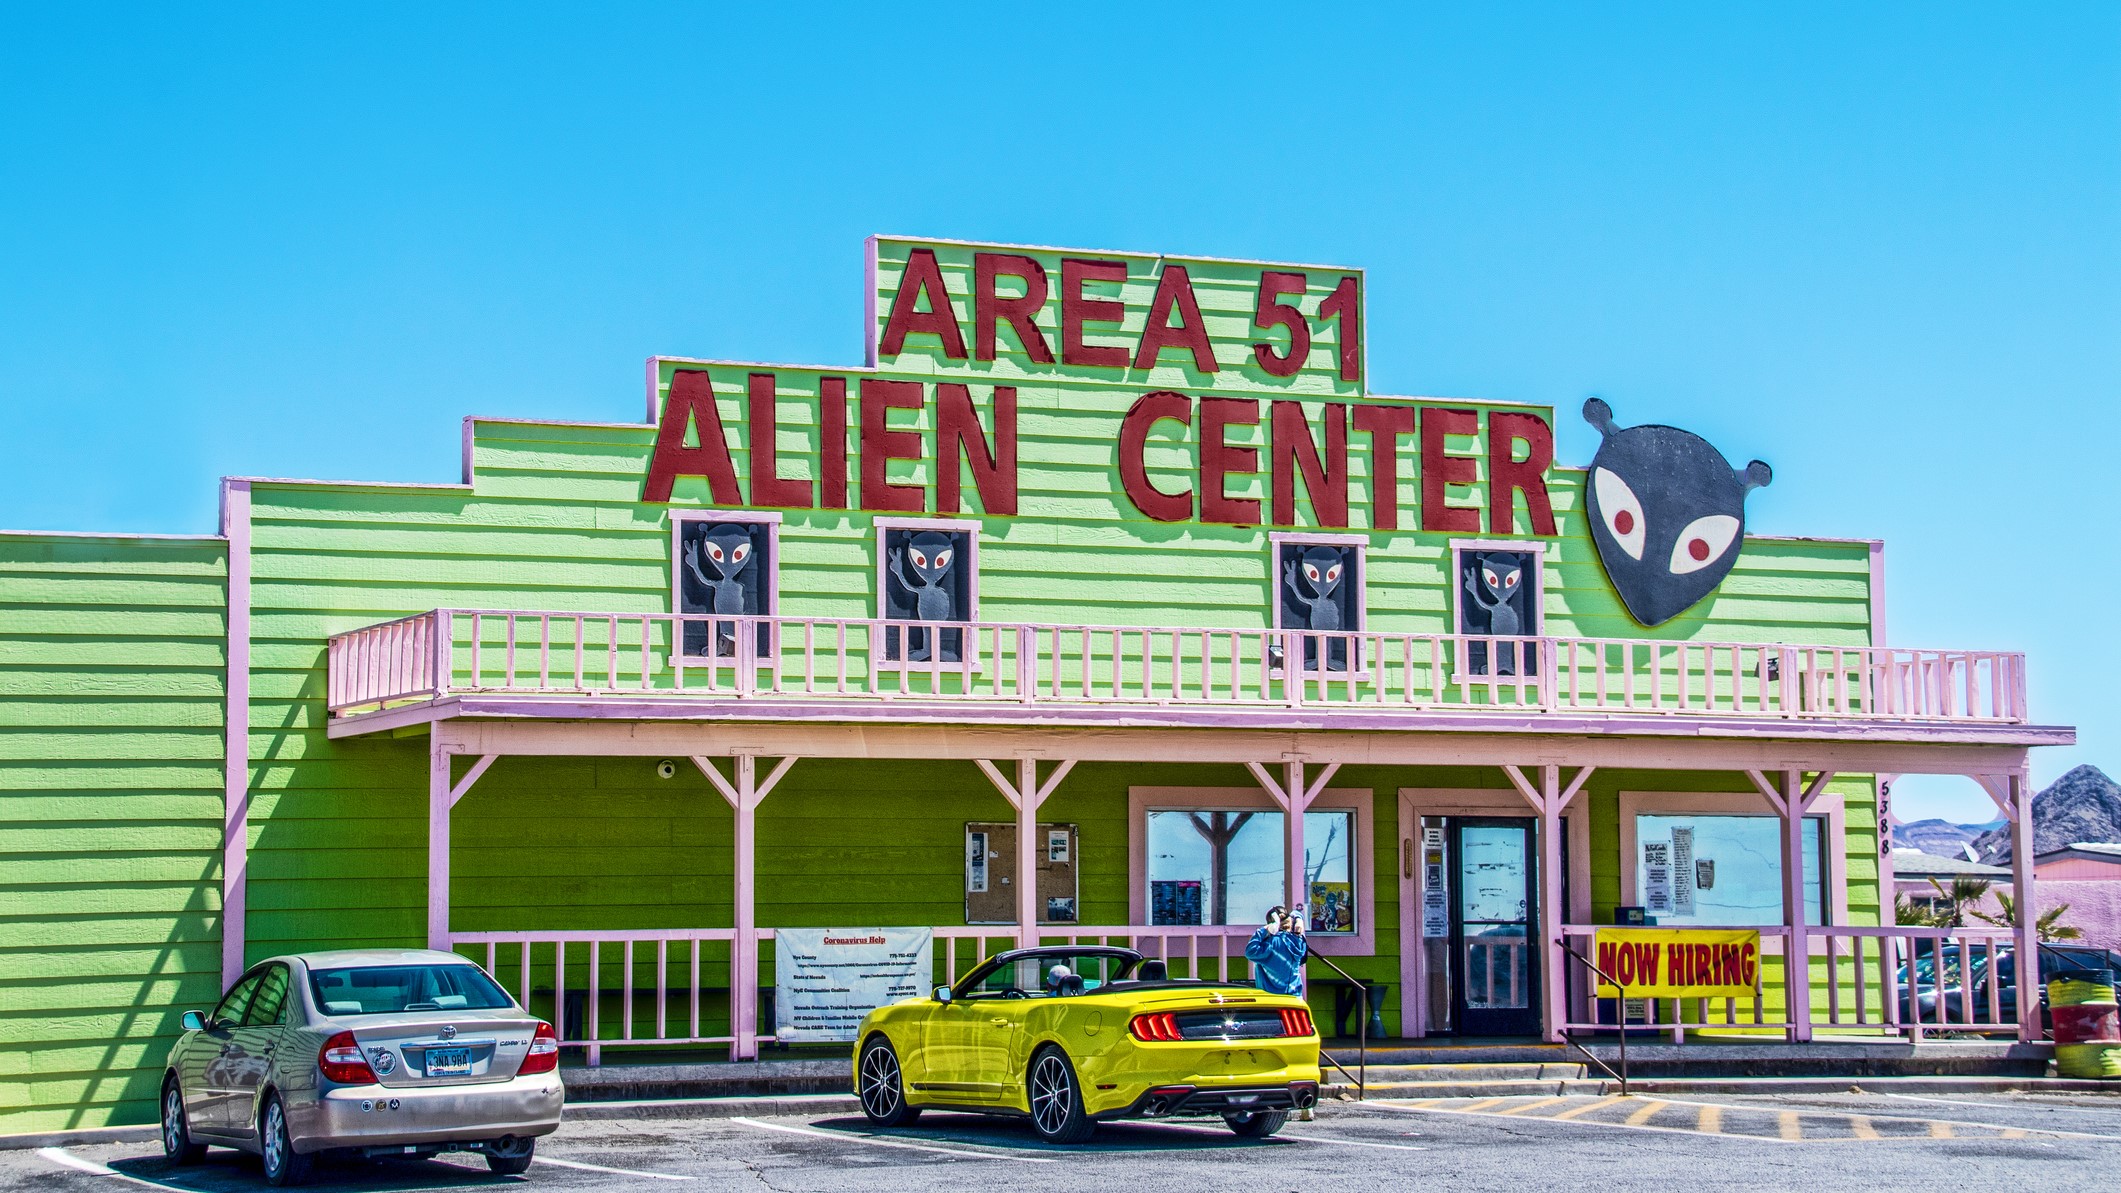 Area 51 Alien Center shopping center and gas station.